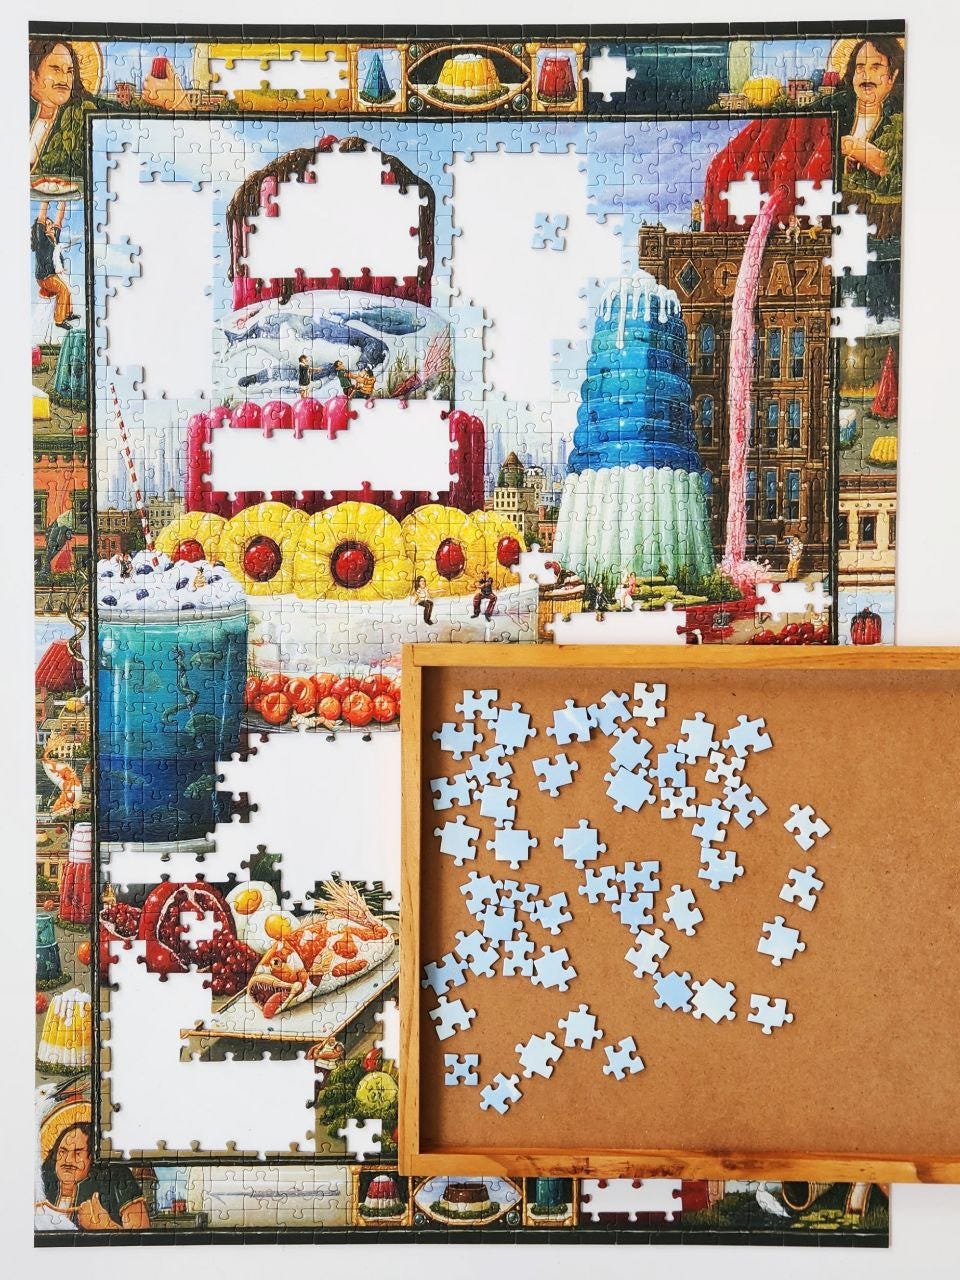 Bits And Pieces bits and pieces - 1500 piece size porta-puzzle jigsaw caddy  - puzzle accessories - puzzle table - 24 x 35